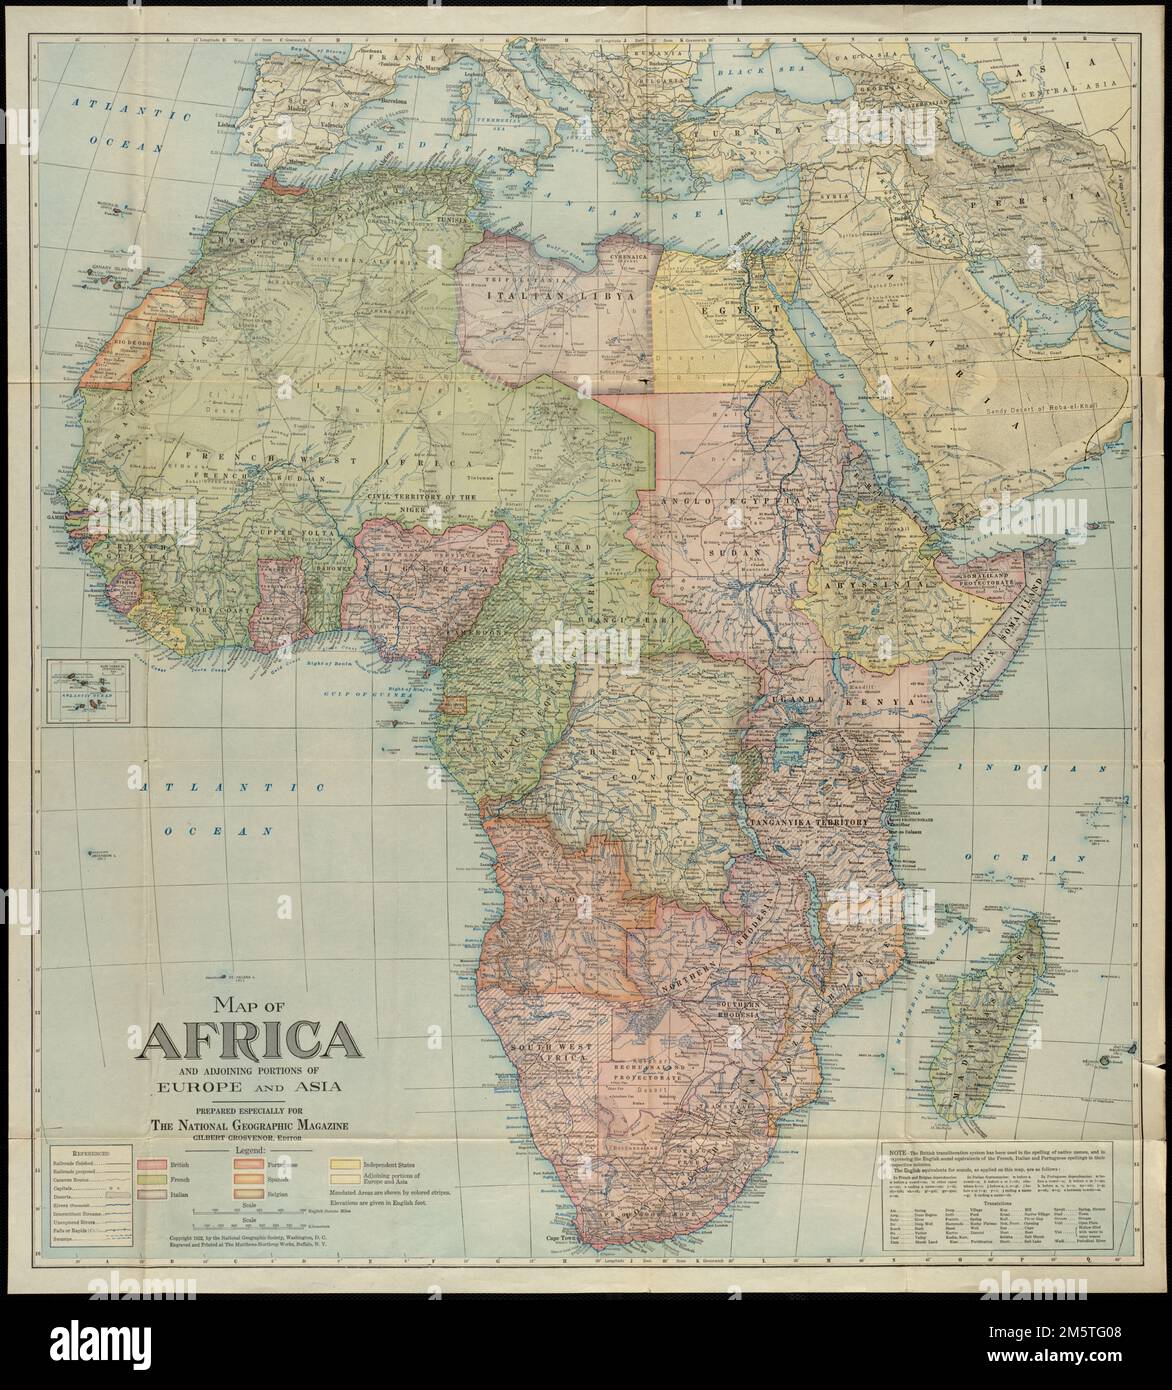 Map of Africa : and adjoining portions of Europe and Asia. Relief shown by shading and spot heights. Includes inset: Cape Verde Islands, and note on transliteration system. 'Copyright 1922, by the National Geographic Society, Washington, D.C.'... , Africa Africa Stock Photo